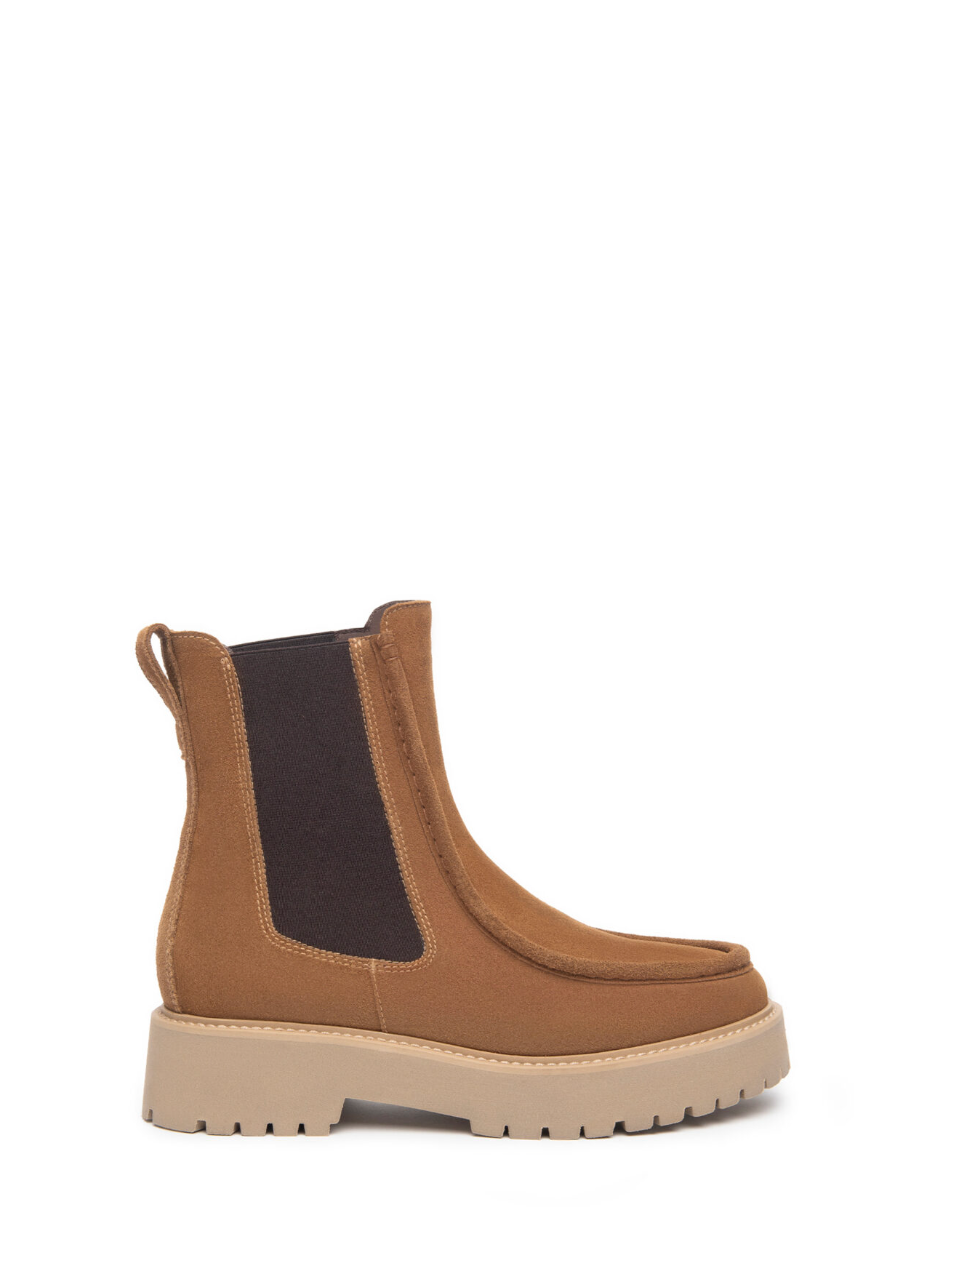 Camel Suede Leather Boot